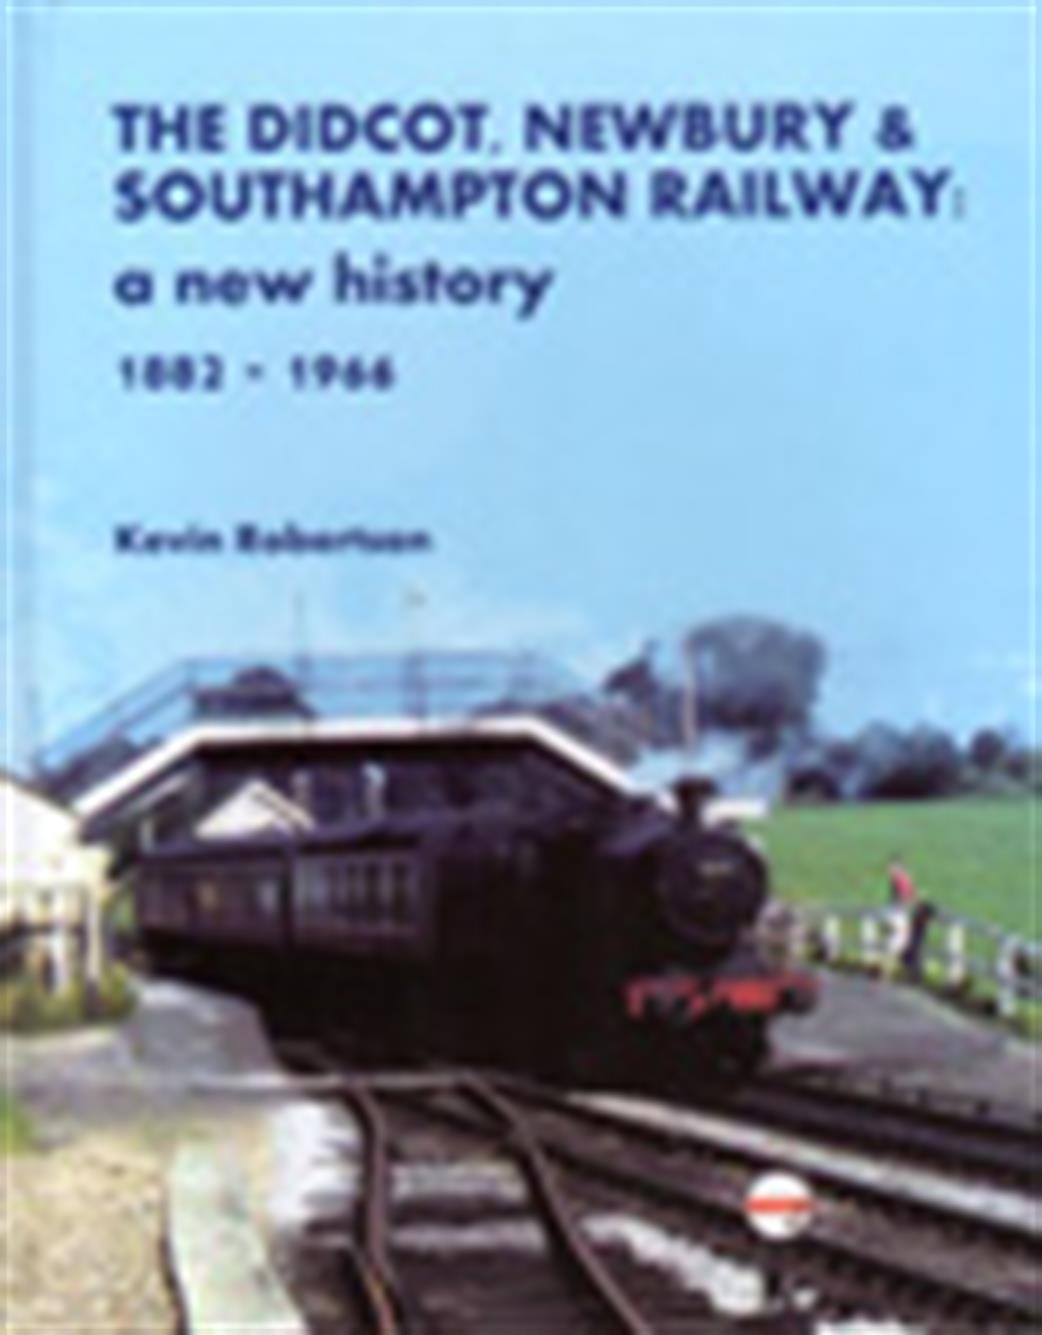 Noodle Books  9781906419837 The Didcot Newbury & Southampton Railway book by Kevin Robertson